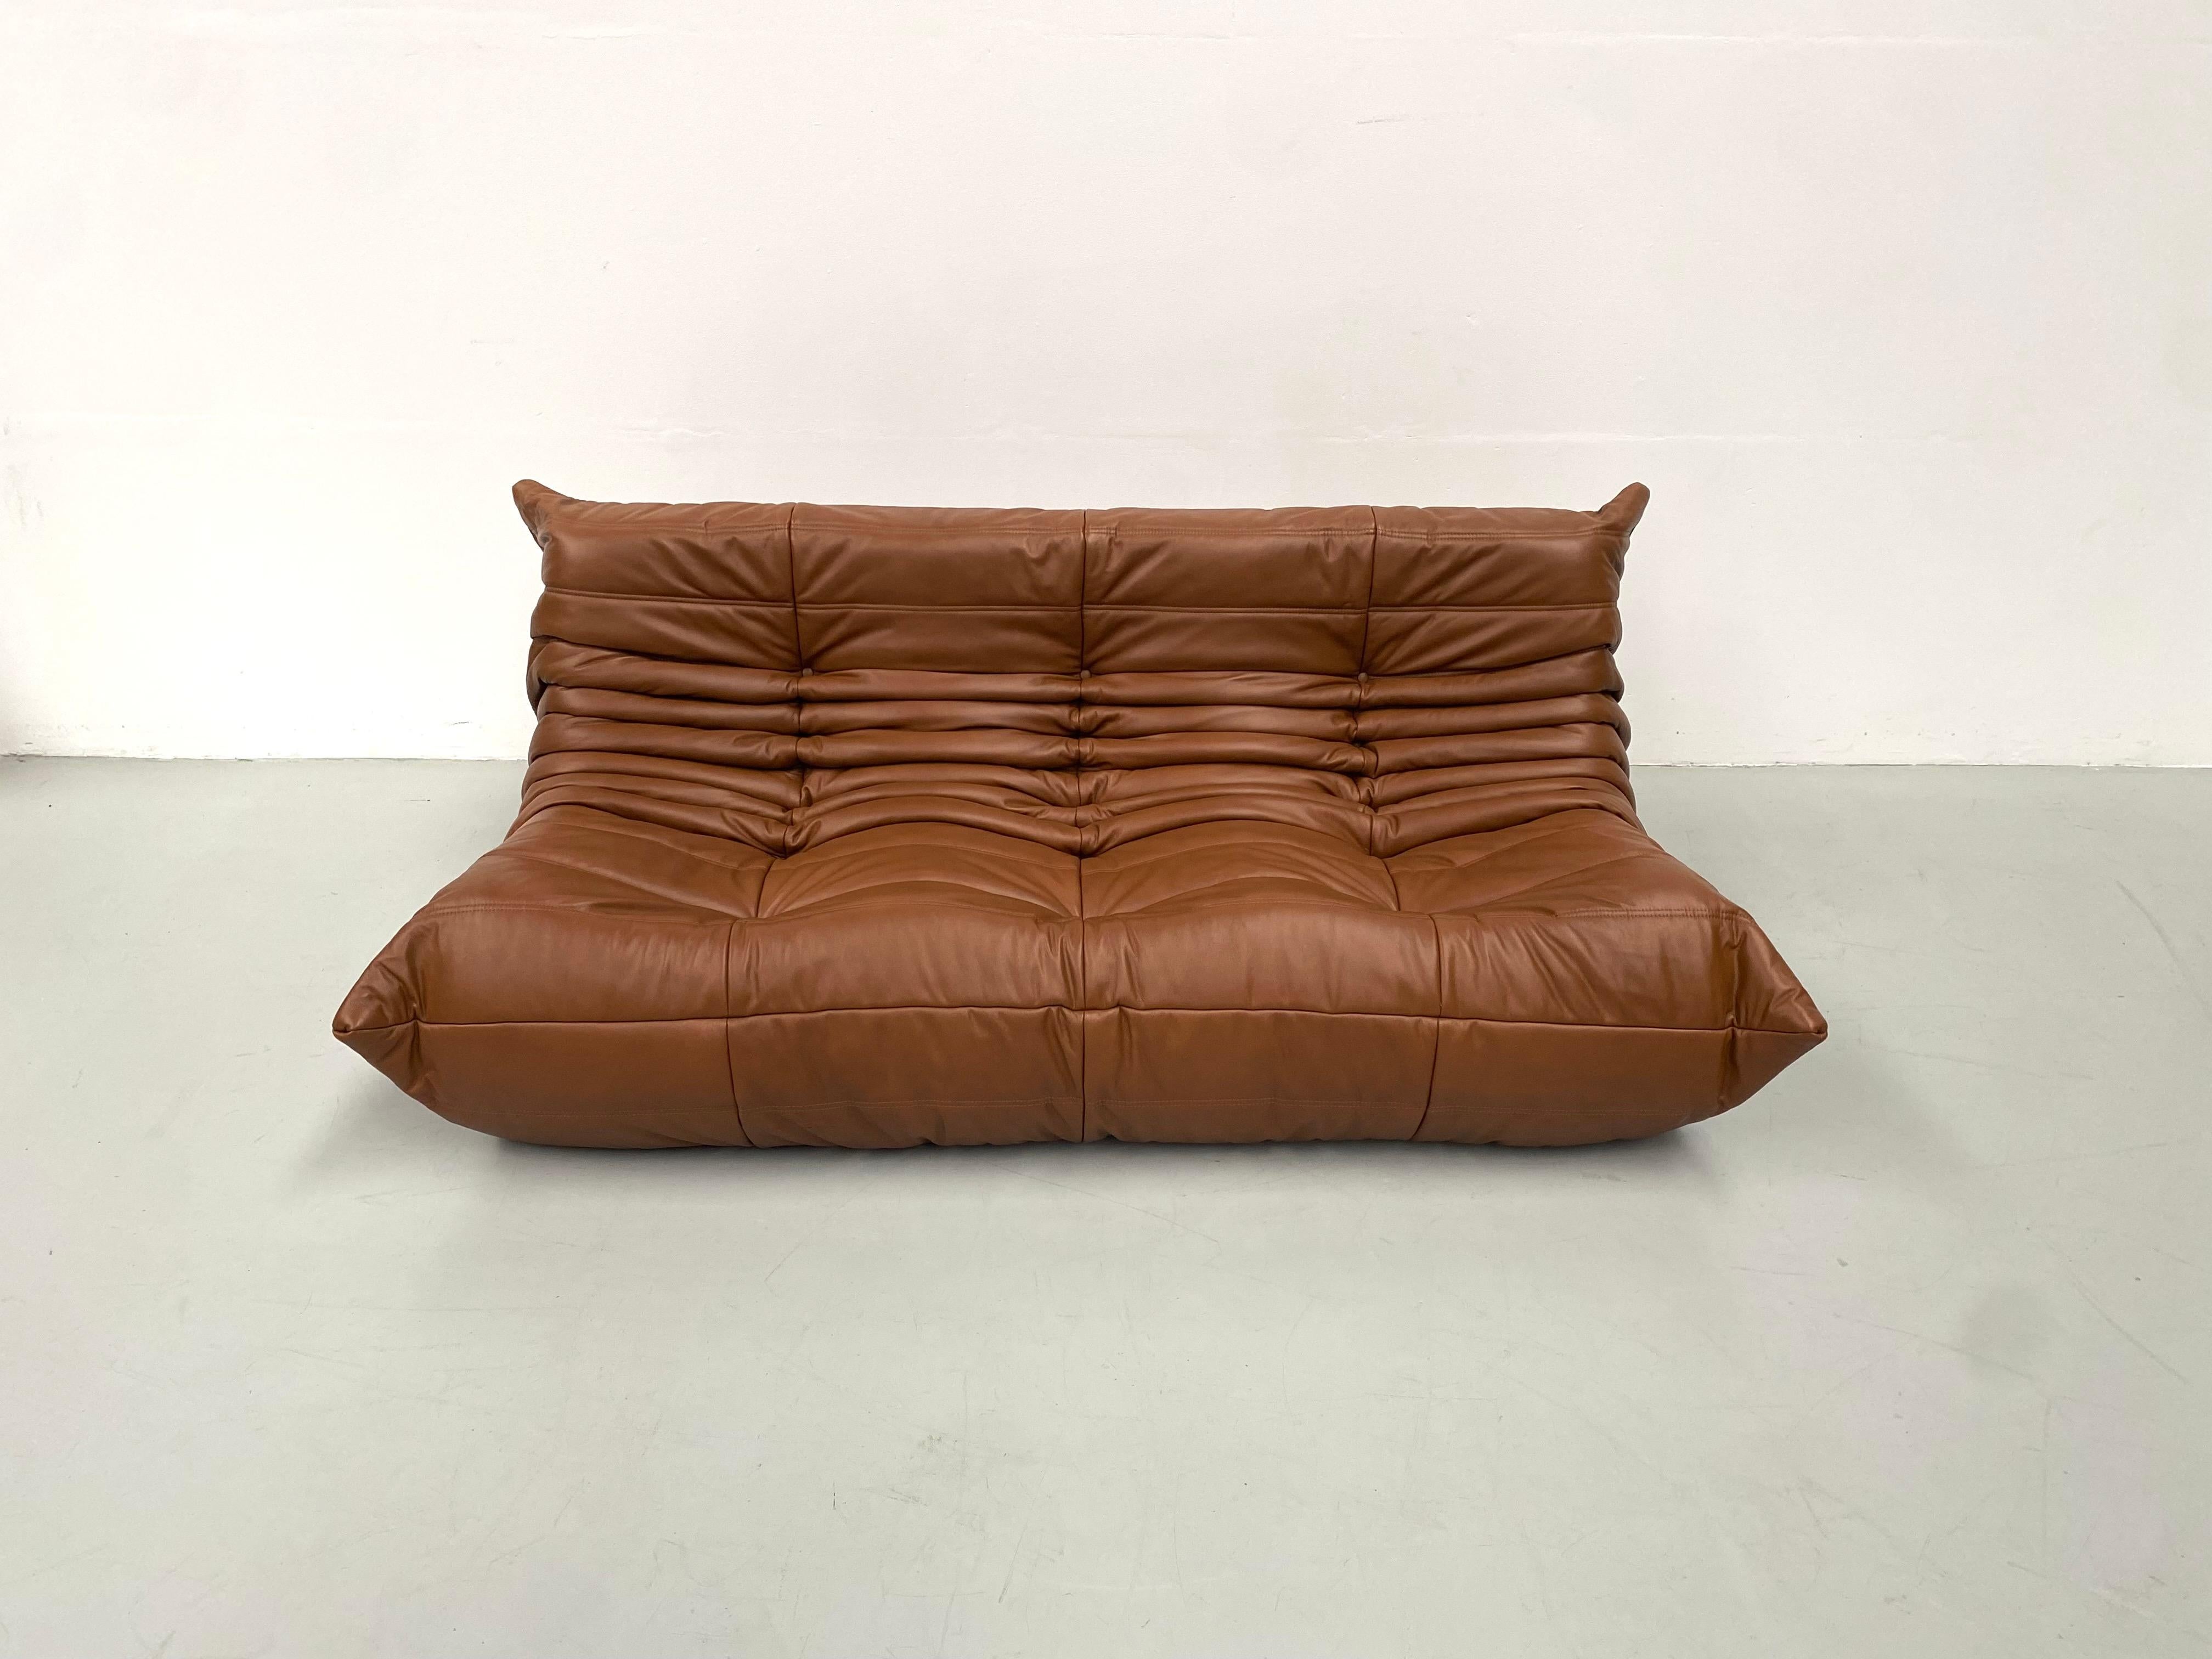 The Togo was designed by Michel Ducaroy in 1973 for Ligne Roset. This particular Togo 3-seater is restored.
Parts of weak foam have been replaced by new foam. Thereafter the sofa is newly upholstered in fine Italian leather. Upon agreement with